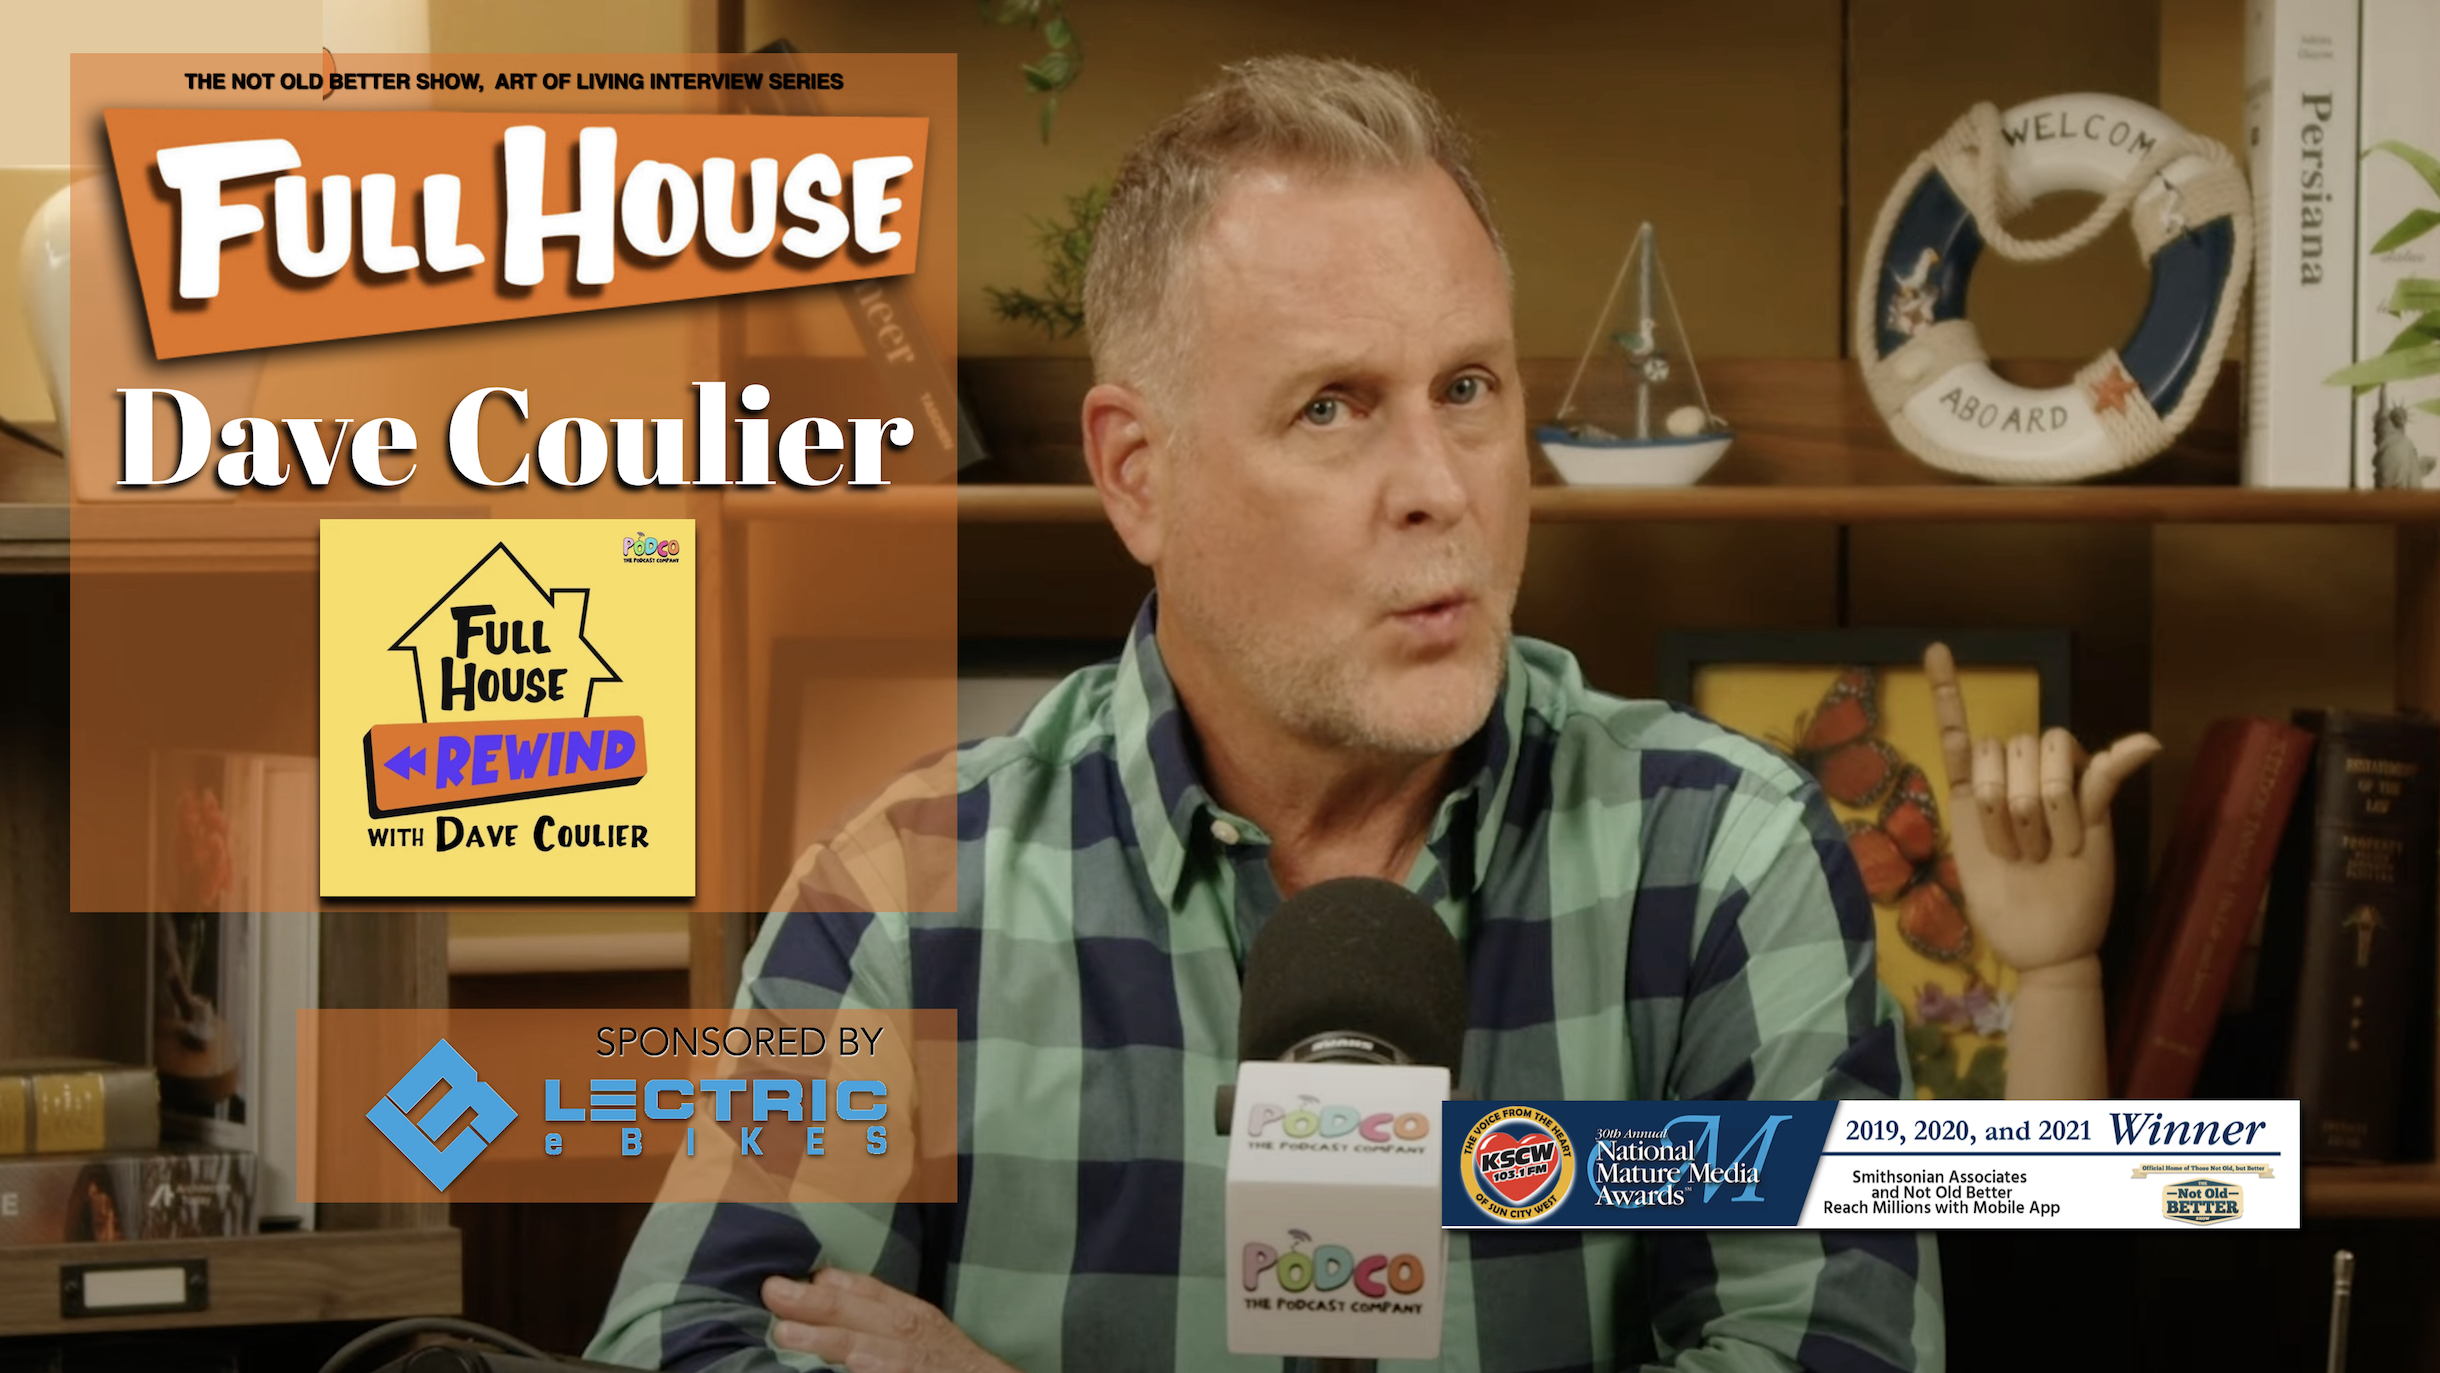 Full House Rewind with Dave Coulier